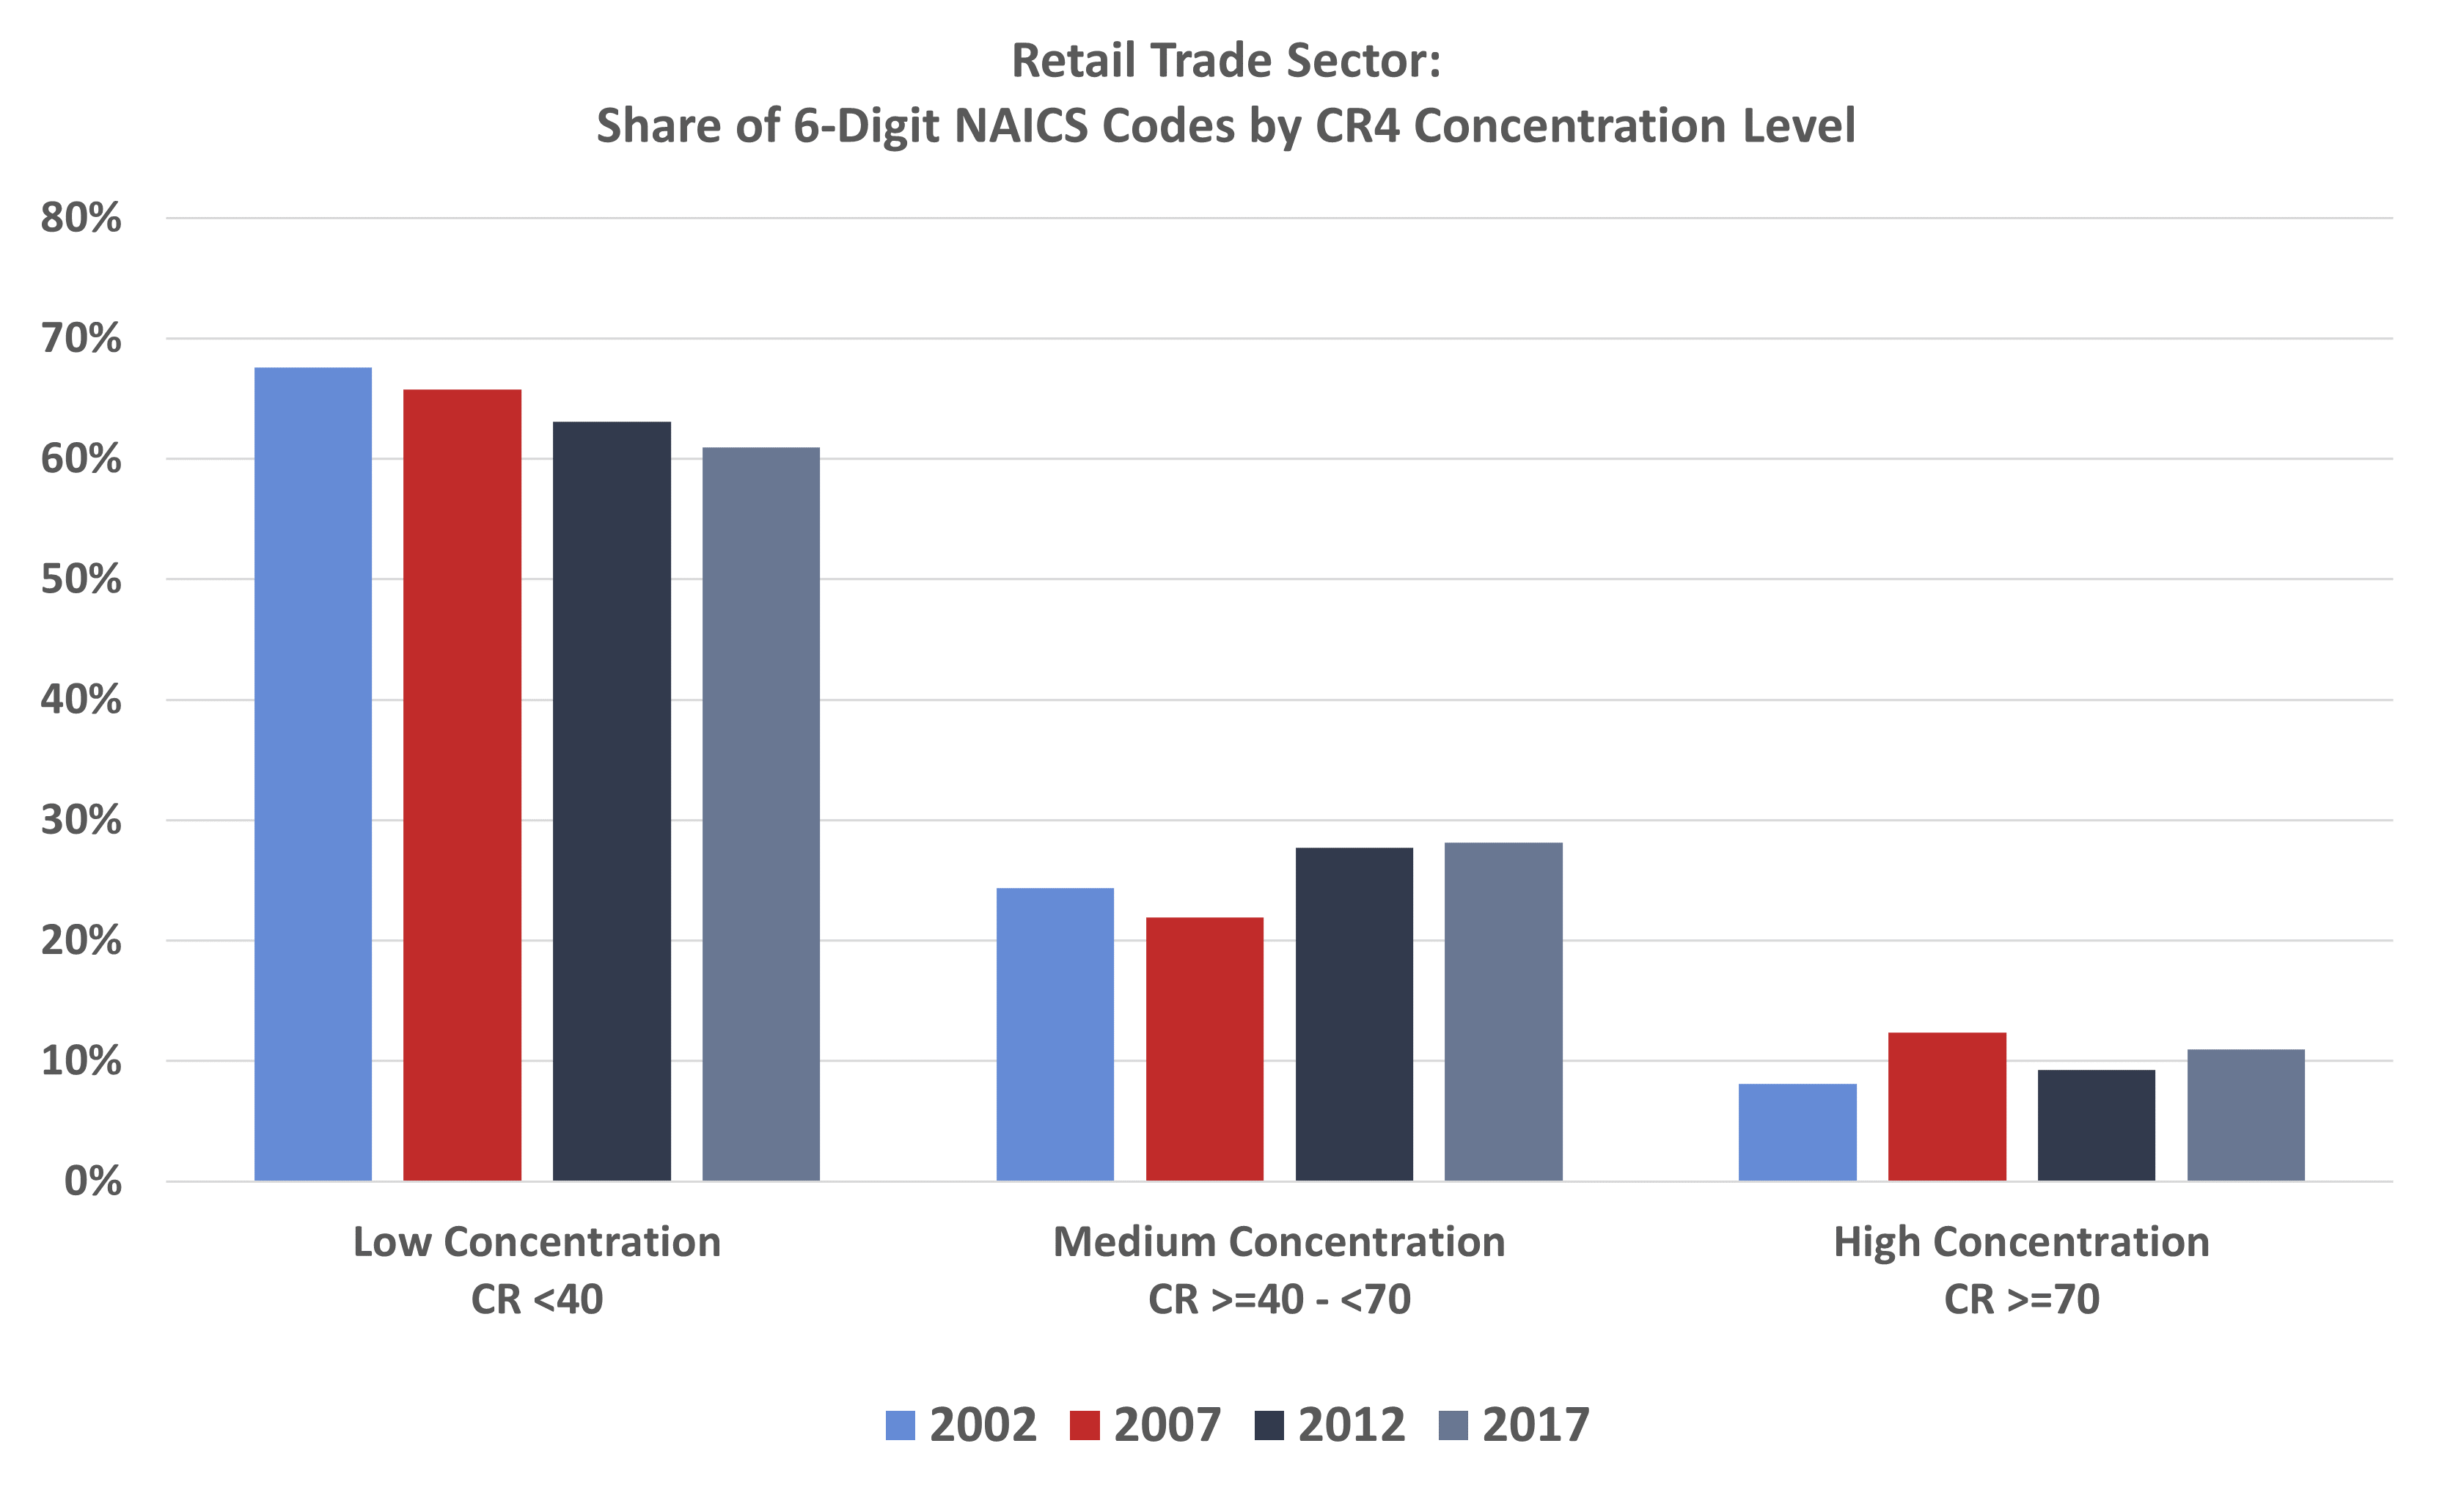 Retail Trade Sector: Share of 6-Digit NAICS Codes by CR4 Concentration Level